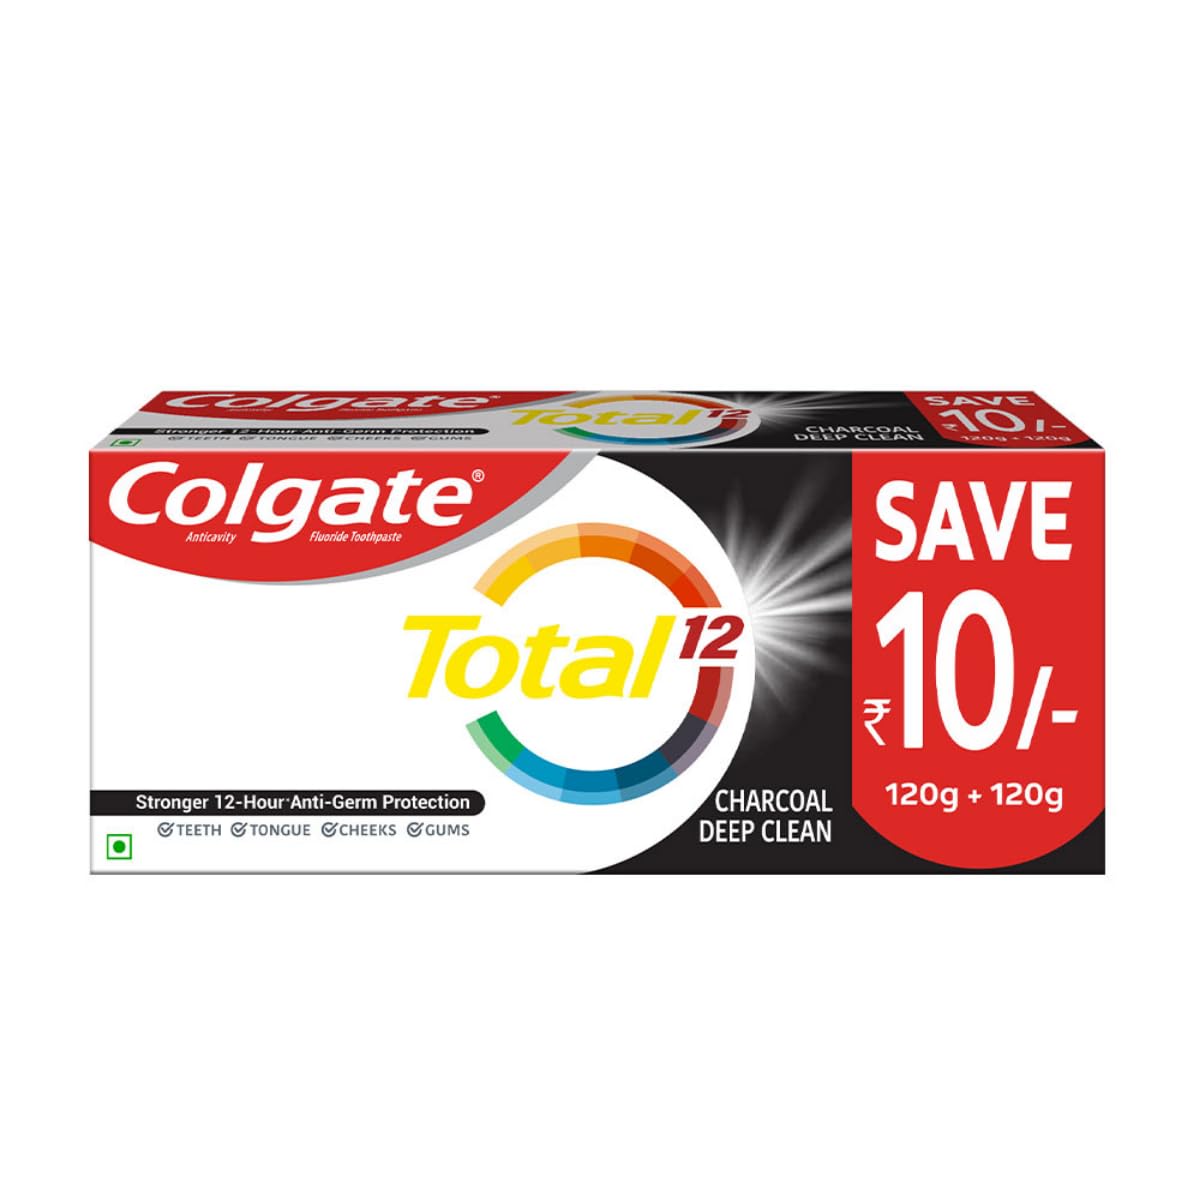 Colgate Total 120 gm + 120 gm (240 gm) Advanced Health Antibacterial Toothpaste, Combo Pack, Whole Mouth Health, Stronger 12-Hour Anti-Germ Protection, World's No. 1* Germ-fighting Toothpaste